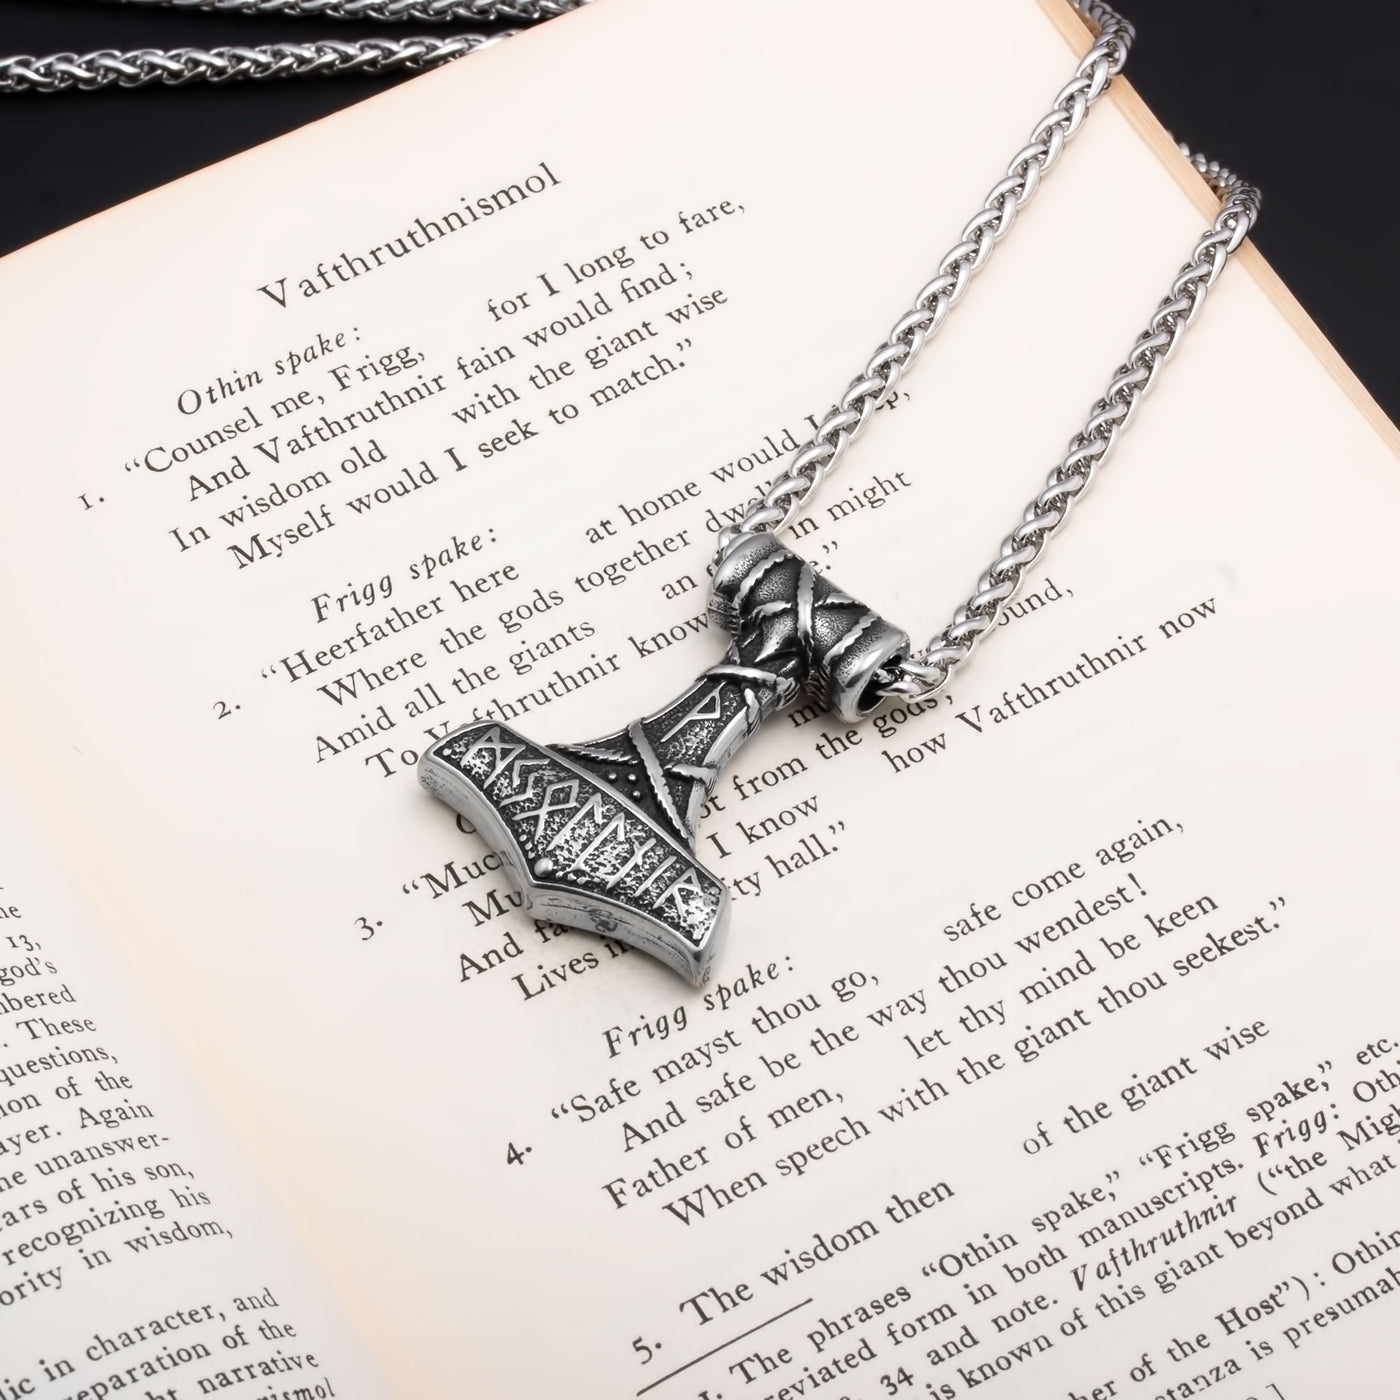 Viking Mjolnir Thor's Hammer Stainless Steel Pendant Necklace Norse American